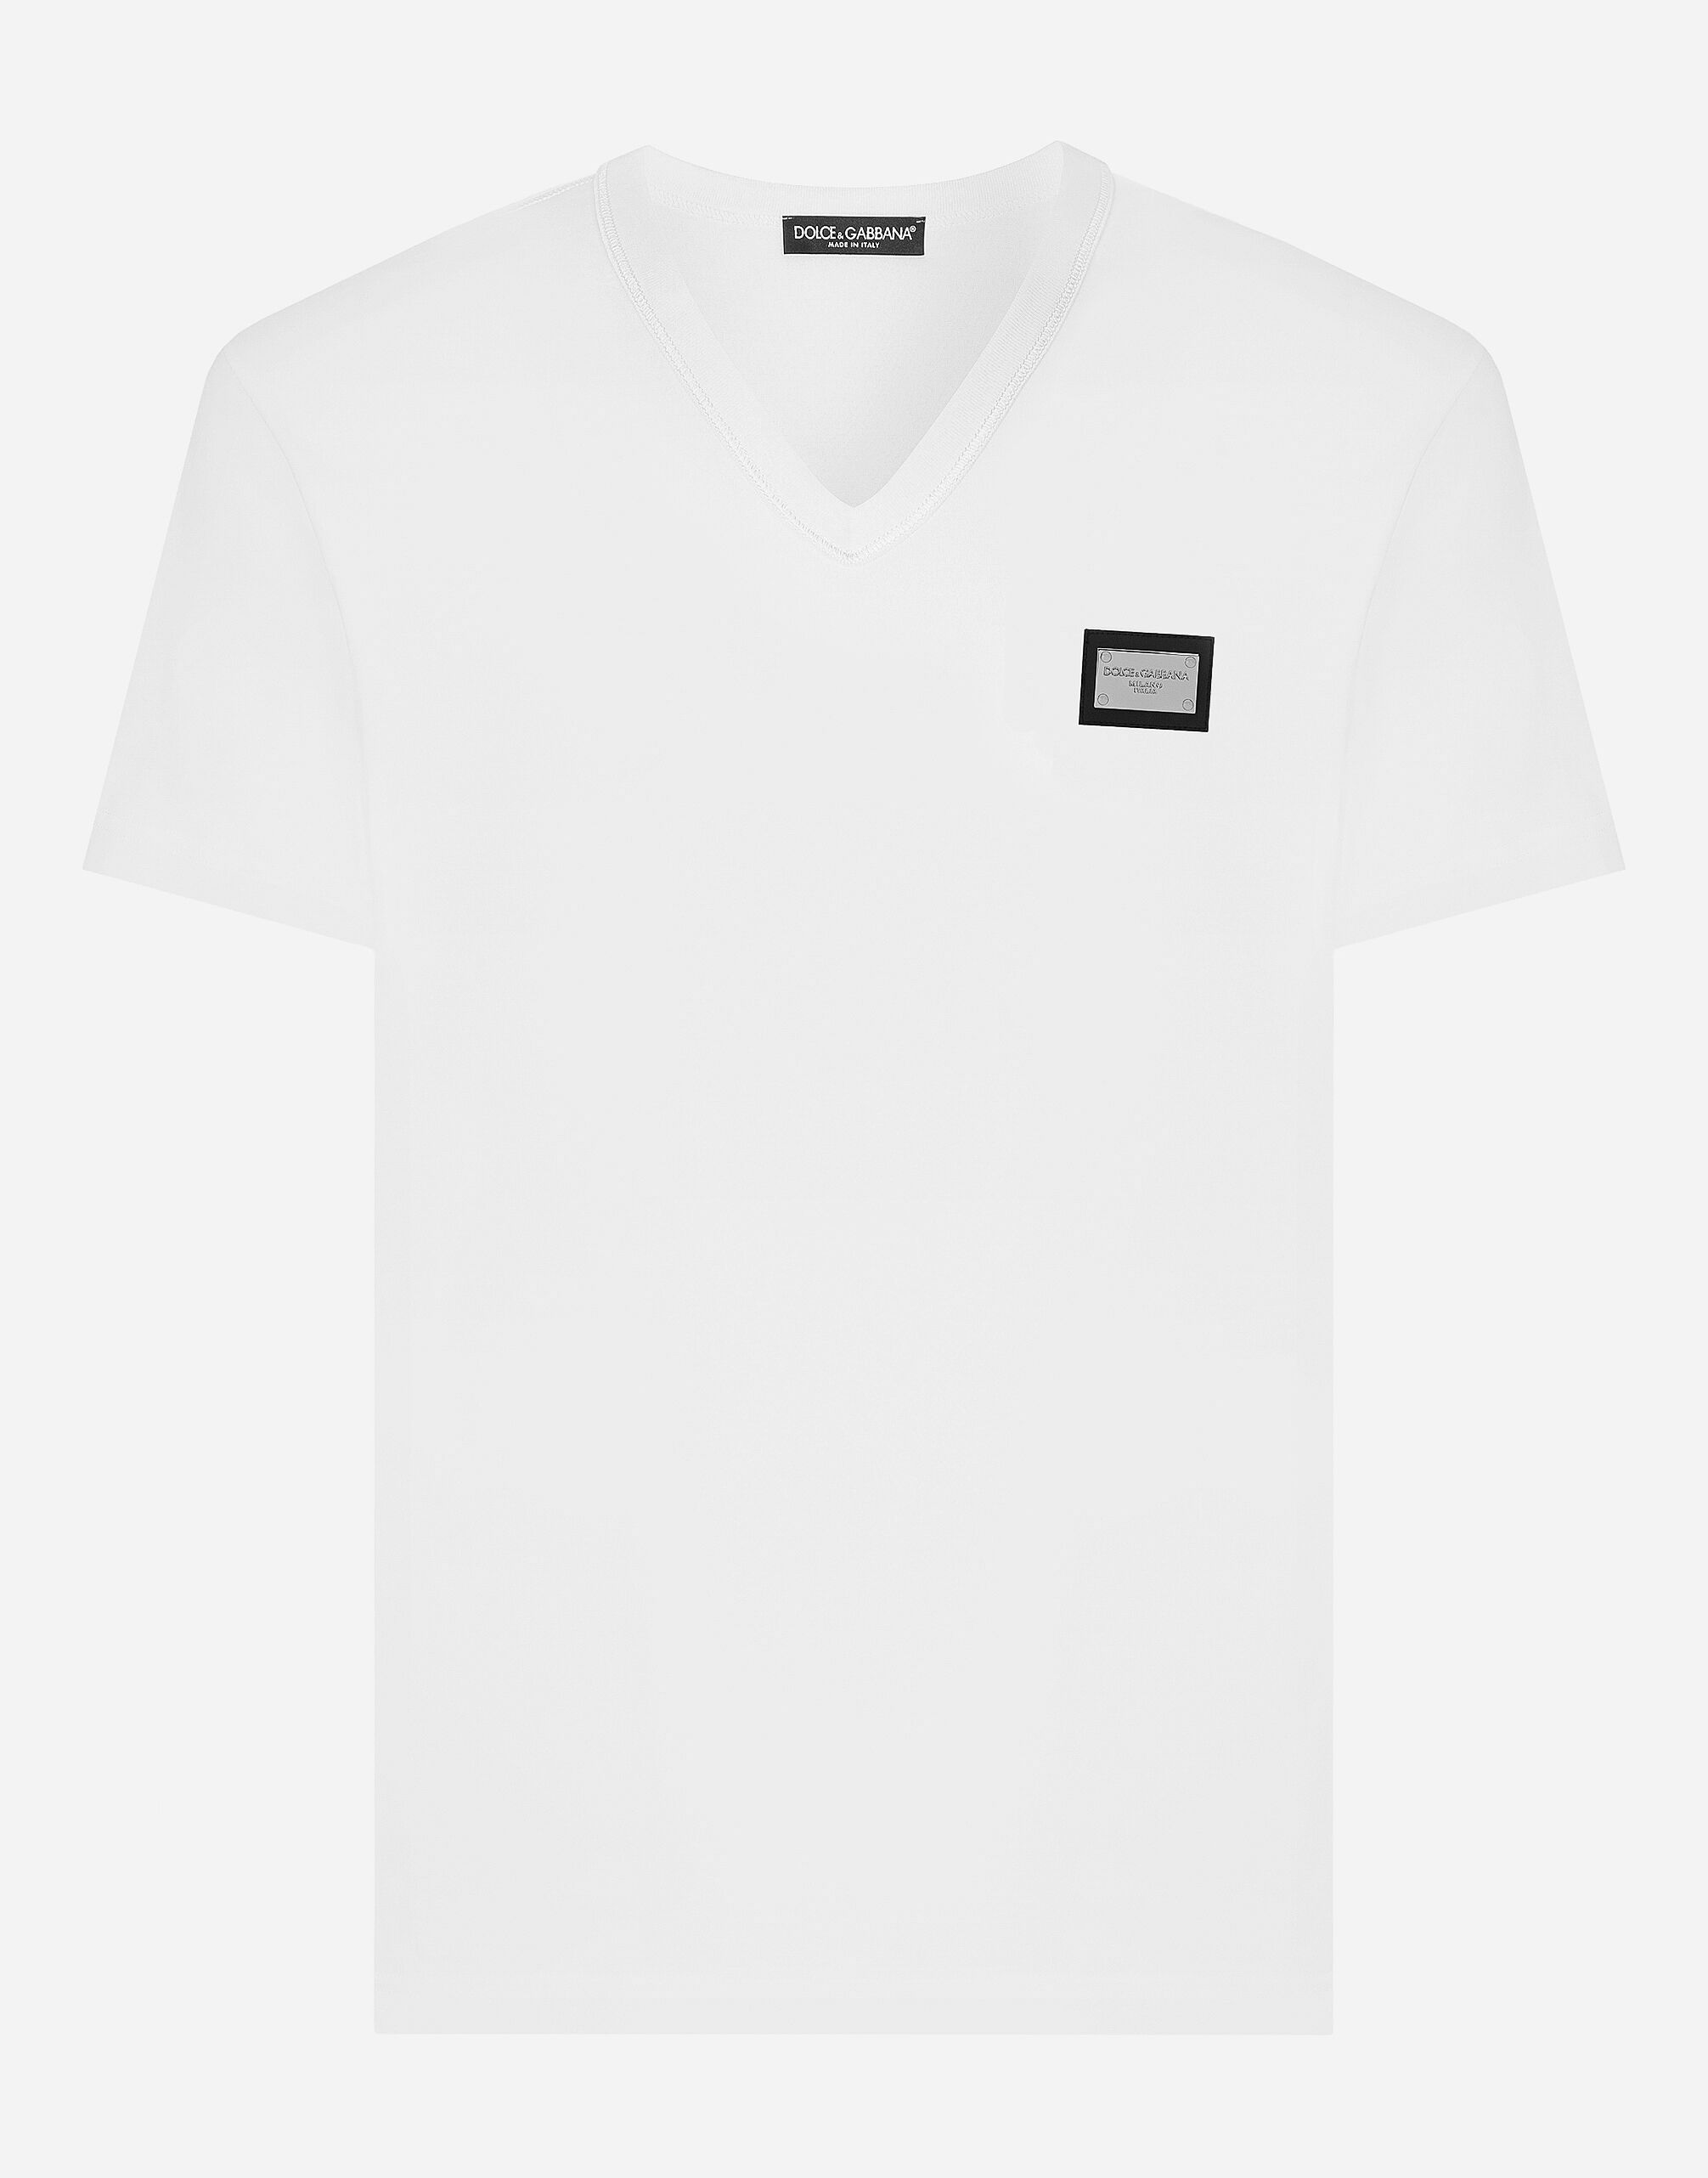 ${brand} Cotton V-neck T-shirt with branded tag ${colorDescription} ${masterID}